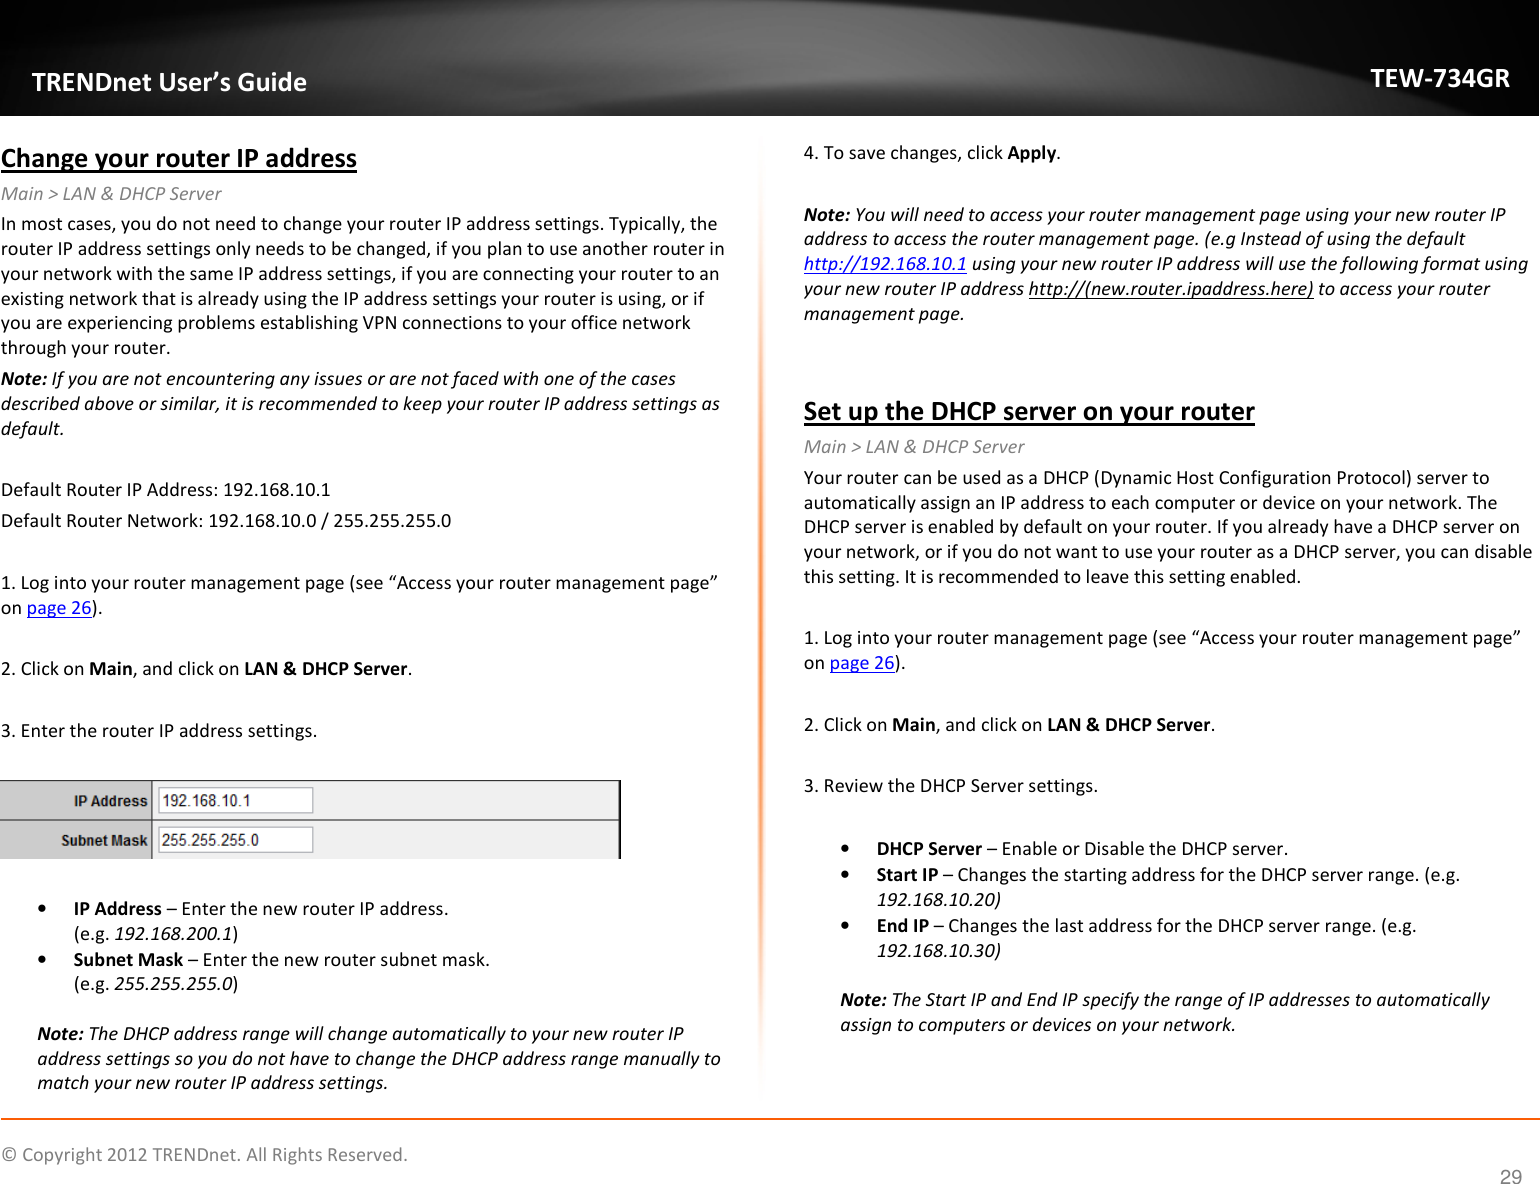              © Copyright 2012 TRENDnet. All Rights Reserved.       TRENDnet User’s Guide TEW-734GR 29 Change your router IP address Main &gt; LAN &amp; DHCP Server In most cases, you do not need to change your router IP address settings. Typically, the router IP address settings only needs to be changed, if you plan to use another router in your network with the same IP address settings, if you are connecting your router to an existing network that is already using the IP address settings your router is using, or if you are experiencing problems establishing VPN connections to your office network through your router. Note: If you are not encountering any issues or are not faced with one of the cases described above or similar, it is recommended to keep your router IP address settings as default.  Default Router IP Address: 192.168.10.1  Default Router Network: 192.168.10.0 / 255.255.255.0  1. Log into your router management page (see “Access your router management page” on page 26).  2. Click on Main, and click on LAN &amp; DHCP Server.  3. Enter the router IP address settings.    • IP Address – Enter the new router IP address.  (e.g. 192.168.200.1) • Subnet Mask – Enter the new router subnet mask. (e.g. 255.255.255.0)  Note: The DHCP address range will change automatically to your new router IP address settings so you do not have to change the DHCP address range manually to match your new router IP address settings.  4. To save changes, click Apply.  Note: You will need to access your router management page using your new router IP address to access the router management page. (e.g Instead of using the default http://192.168.10.1 using your new router IP address will use the following format using your new router IP address http://(new.router.ipaddress.here) to access your router management page.   Set up the DHCP server on your router Main &gt; LAN &amp; DHCP Server Your router can be used as a DHCP (Dynamic Host Configuration Protocol) server to automatically assign an IP address to each computer or device on your network. The DHCP server is enabled by default on your router. If you already have a DHCP server on your network, or if you do not want to use your router as a DHCP server, you can disable this setting. It is recommended to leave this setting enabled.  1. Log into your router management page (see “Access your router management page” on page 26).  2. Click on Main, and click on LAN &amp; DHCP Server.  3. Review the DHCP Server settings.  • DHCP Server – Enable or Disable the DHCP server. • Start IP – Changes the starting address for the DHCP server range. (e.g. 192.168.10.20) • End IP – Changes the last address for the DHCP server range. (e.g. 192.168.10.30)  Note: The Start IP and End IP specify the range of IP addresses to automatically assign to computers or devices on your network.   